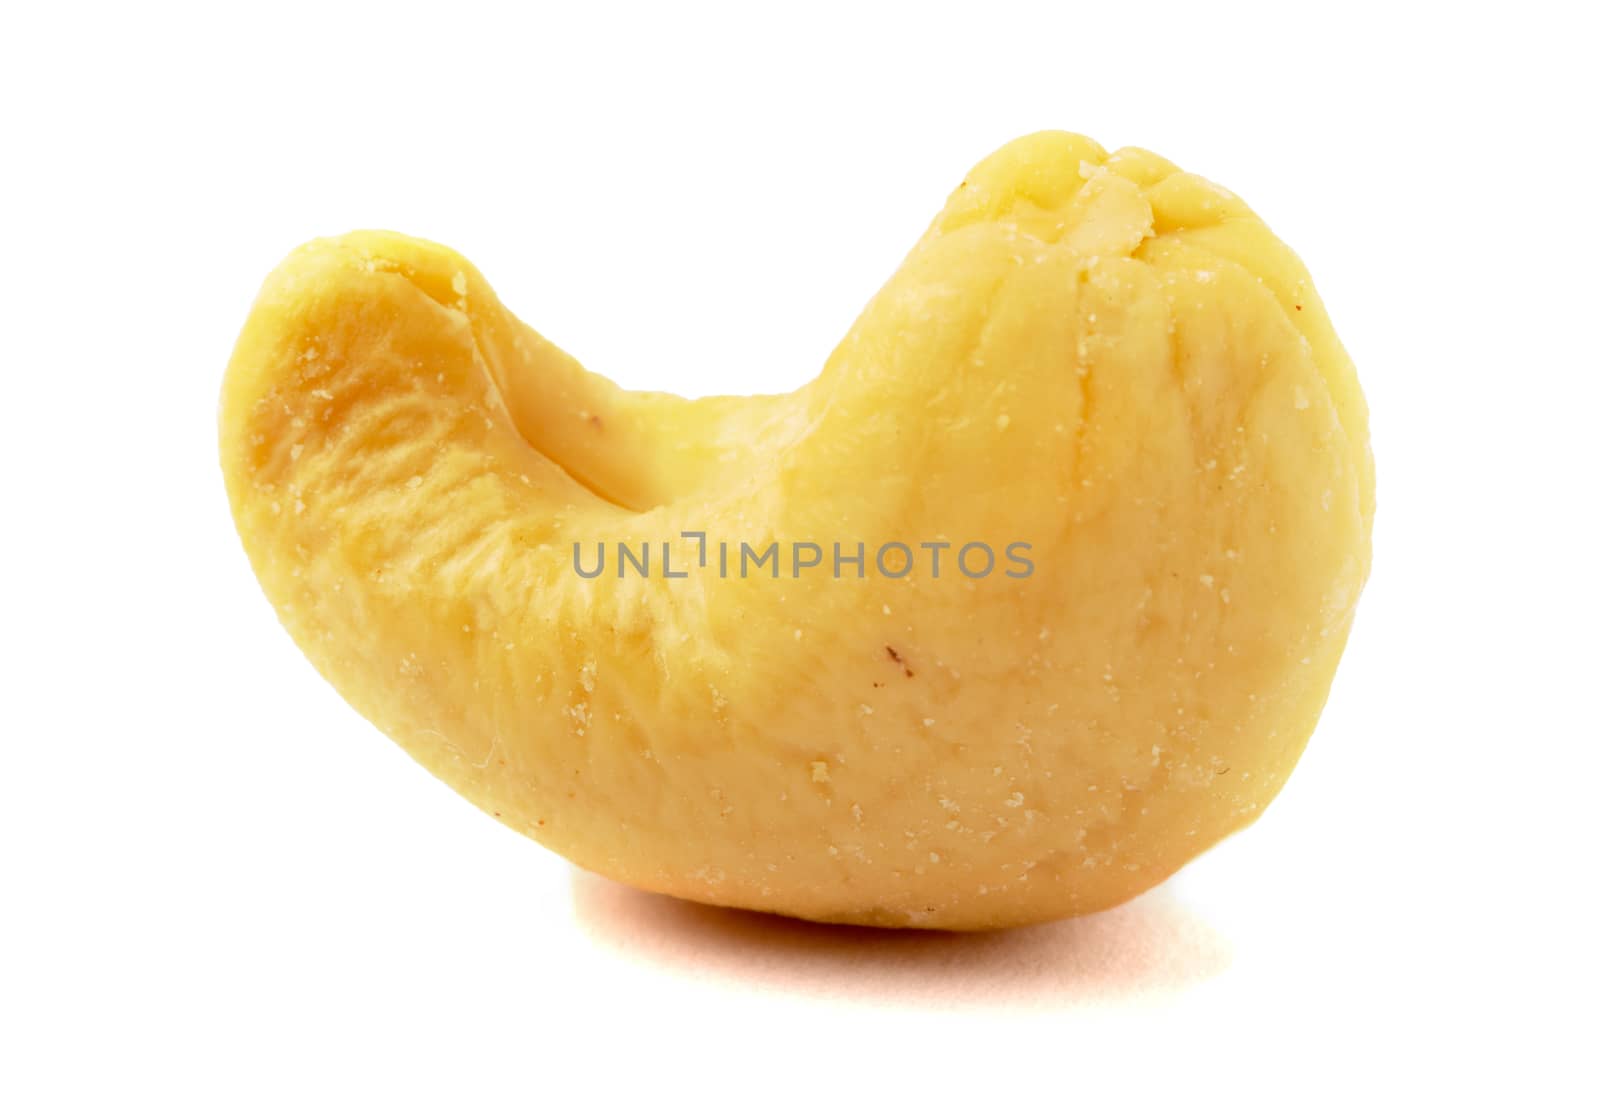 Some Cashew nuts on a white background